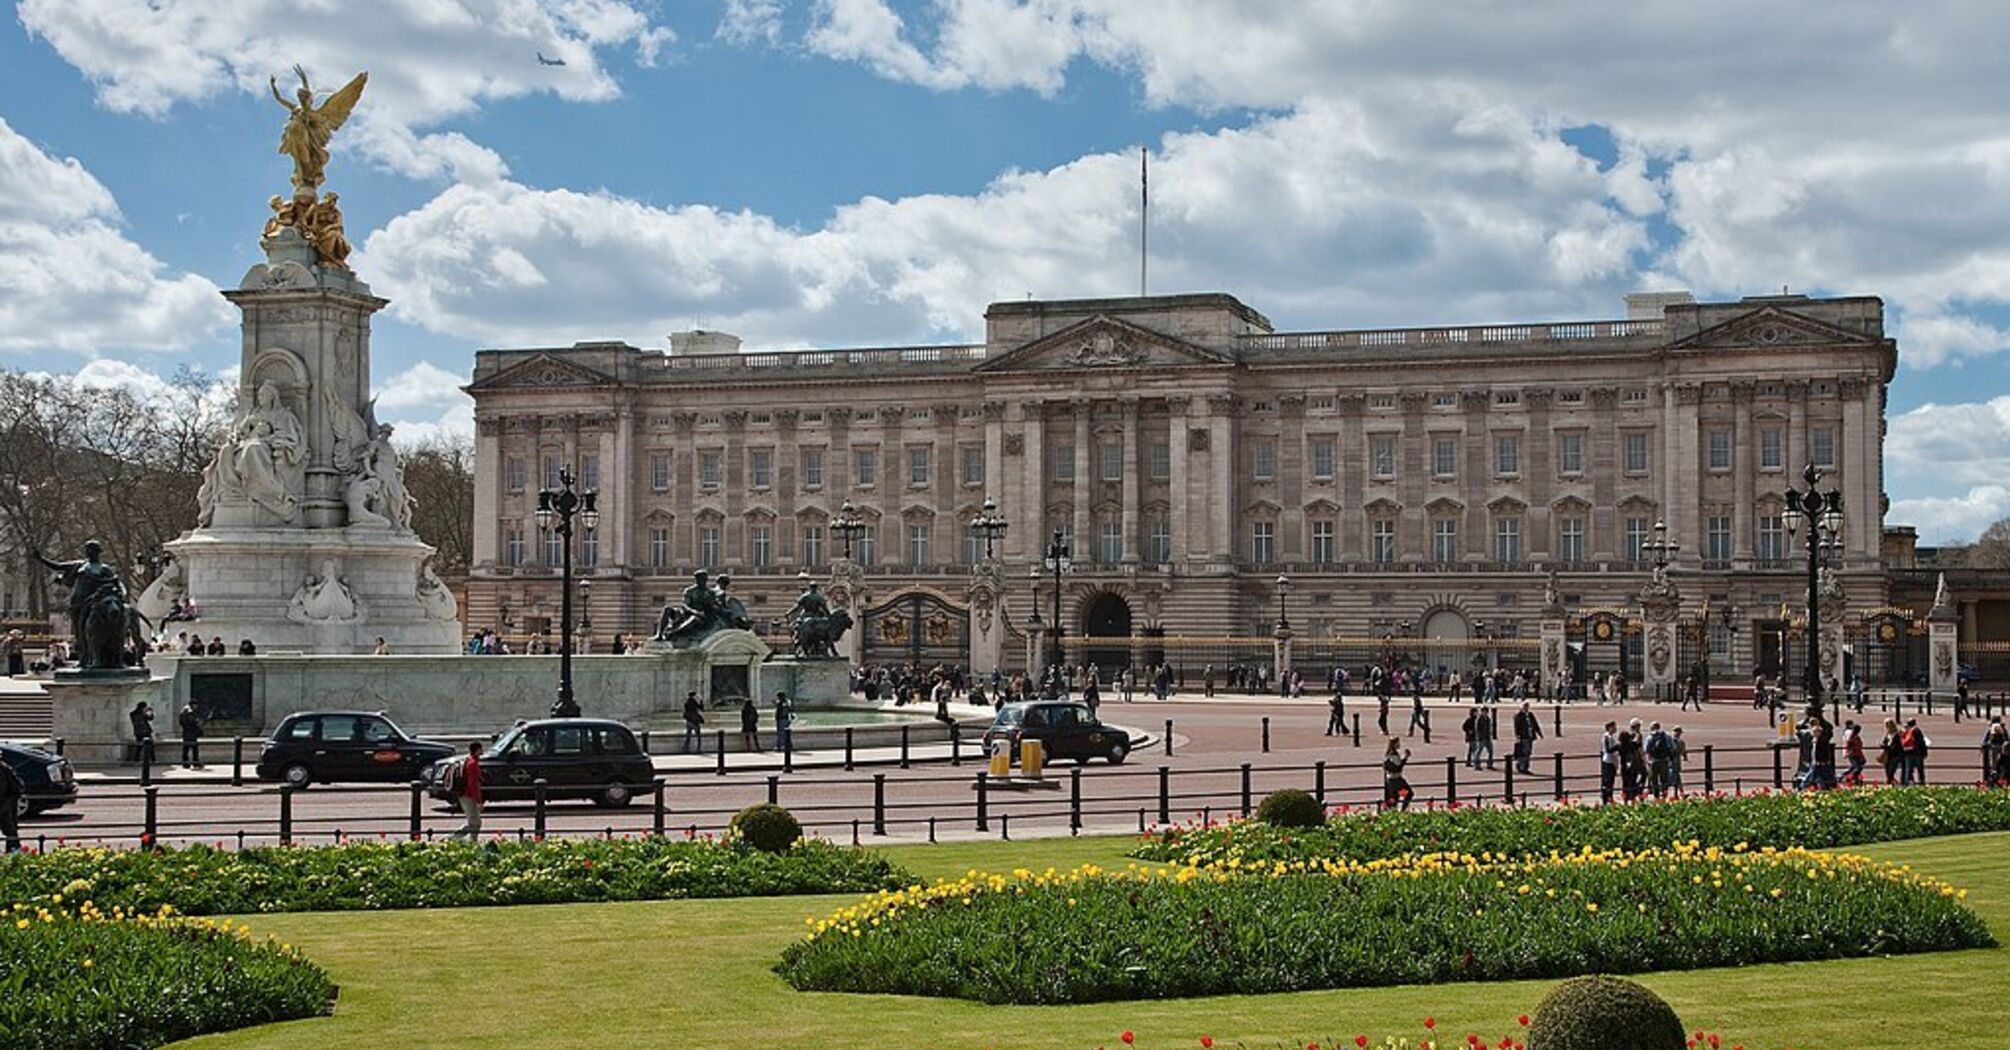 Buckingham Palace 'smells of linoleum' and is 'too cold and crowded,' say disappointed tourists